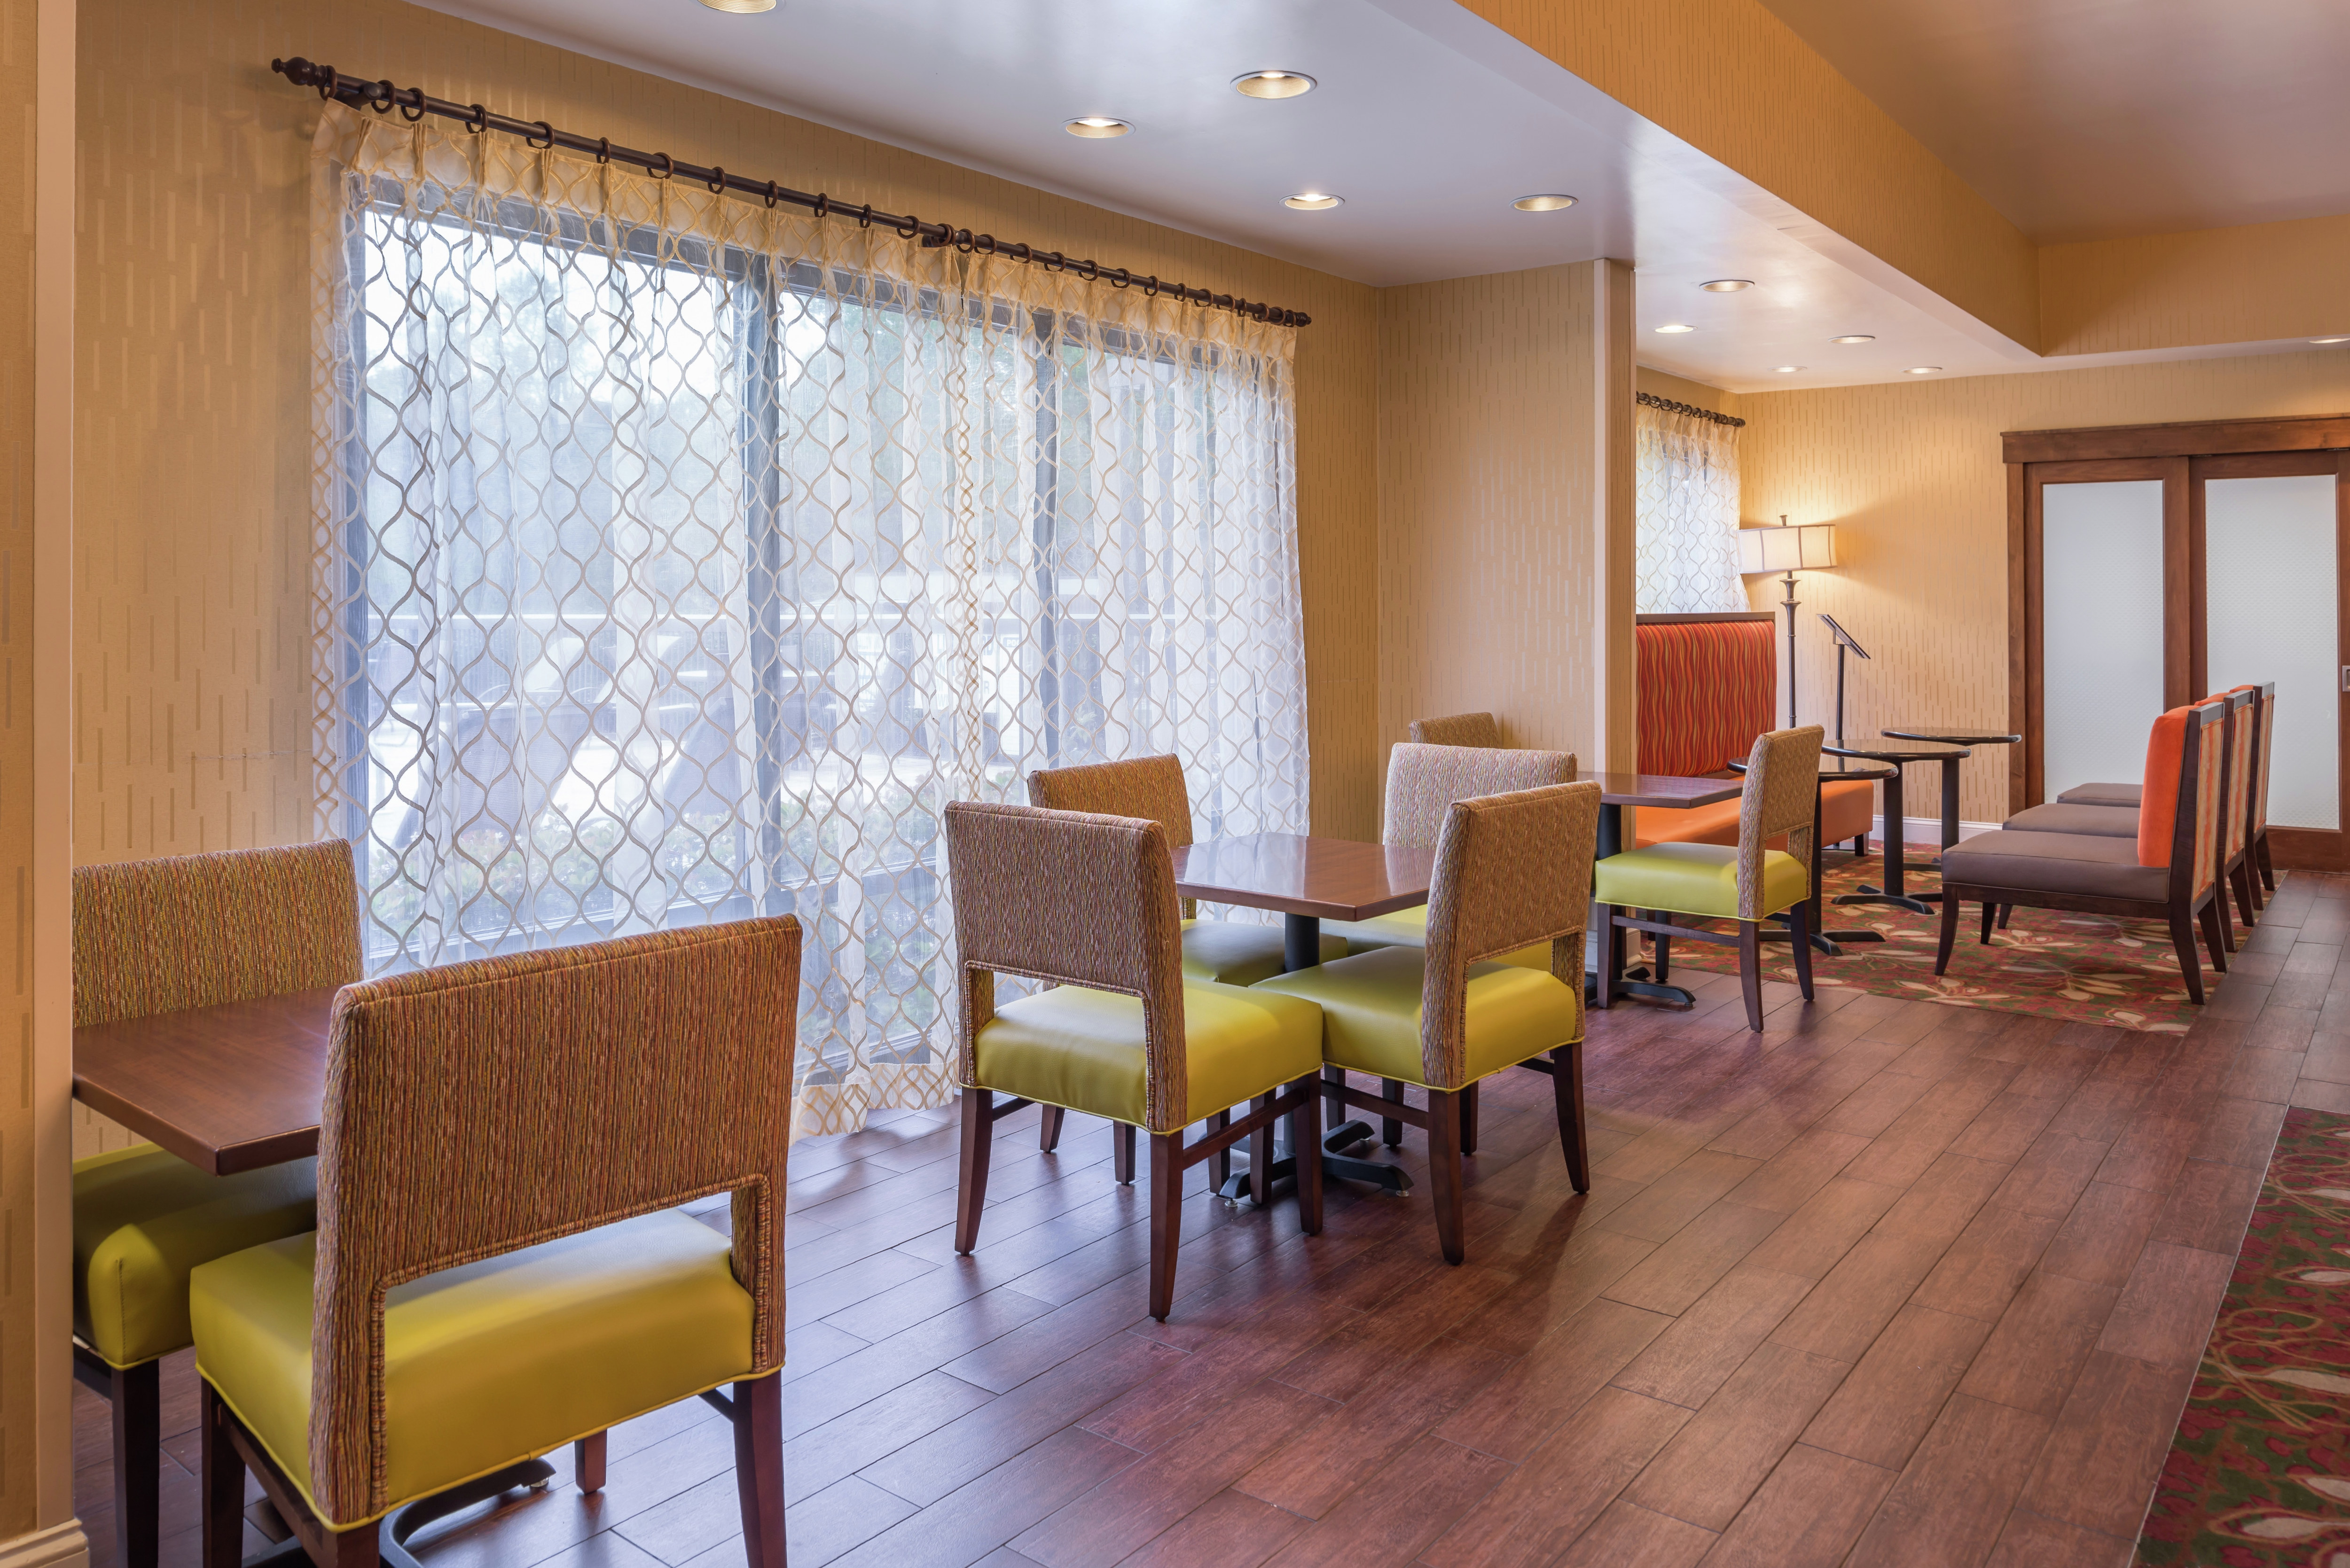 Tables, Chairs, Booths, and LArge Windows With Sheer Drapes in Hotel Dining Area